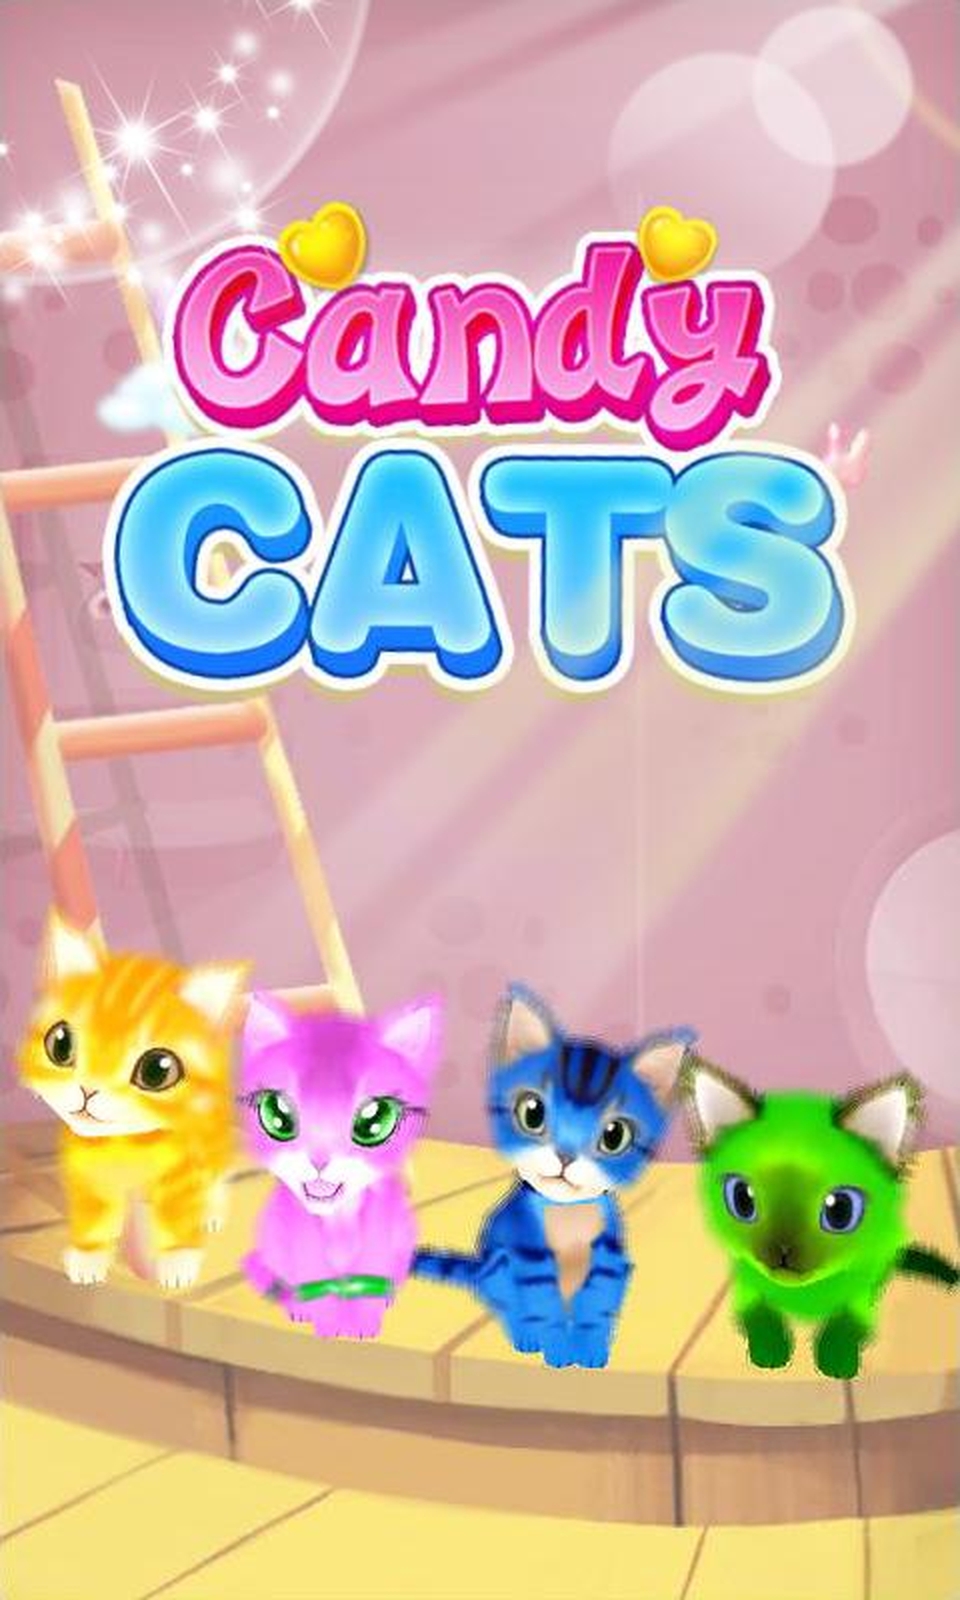 Candy Cats and Cash demo